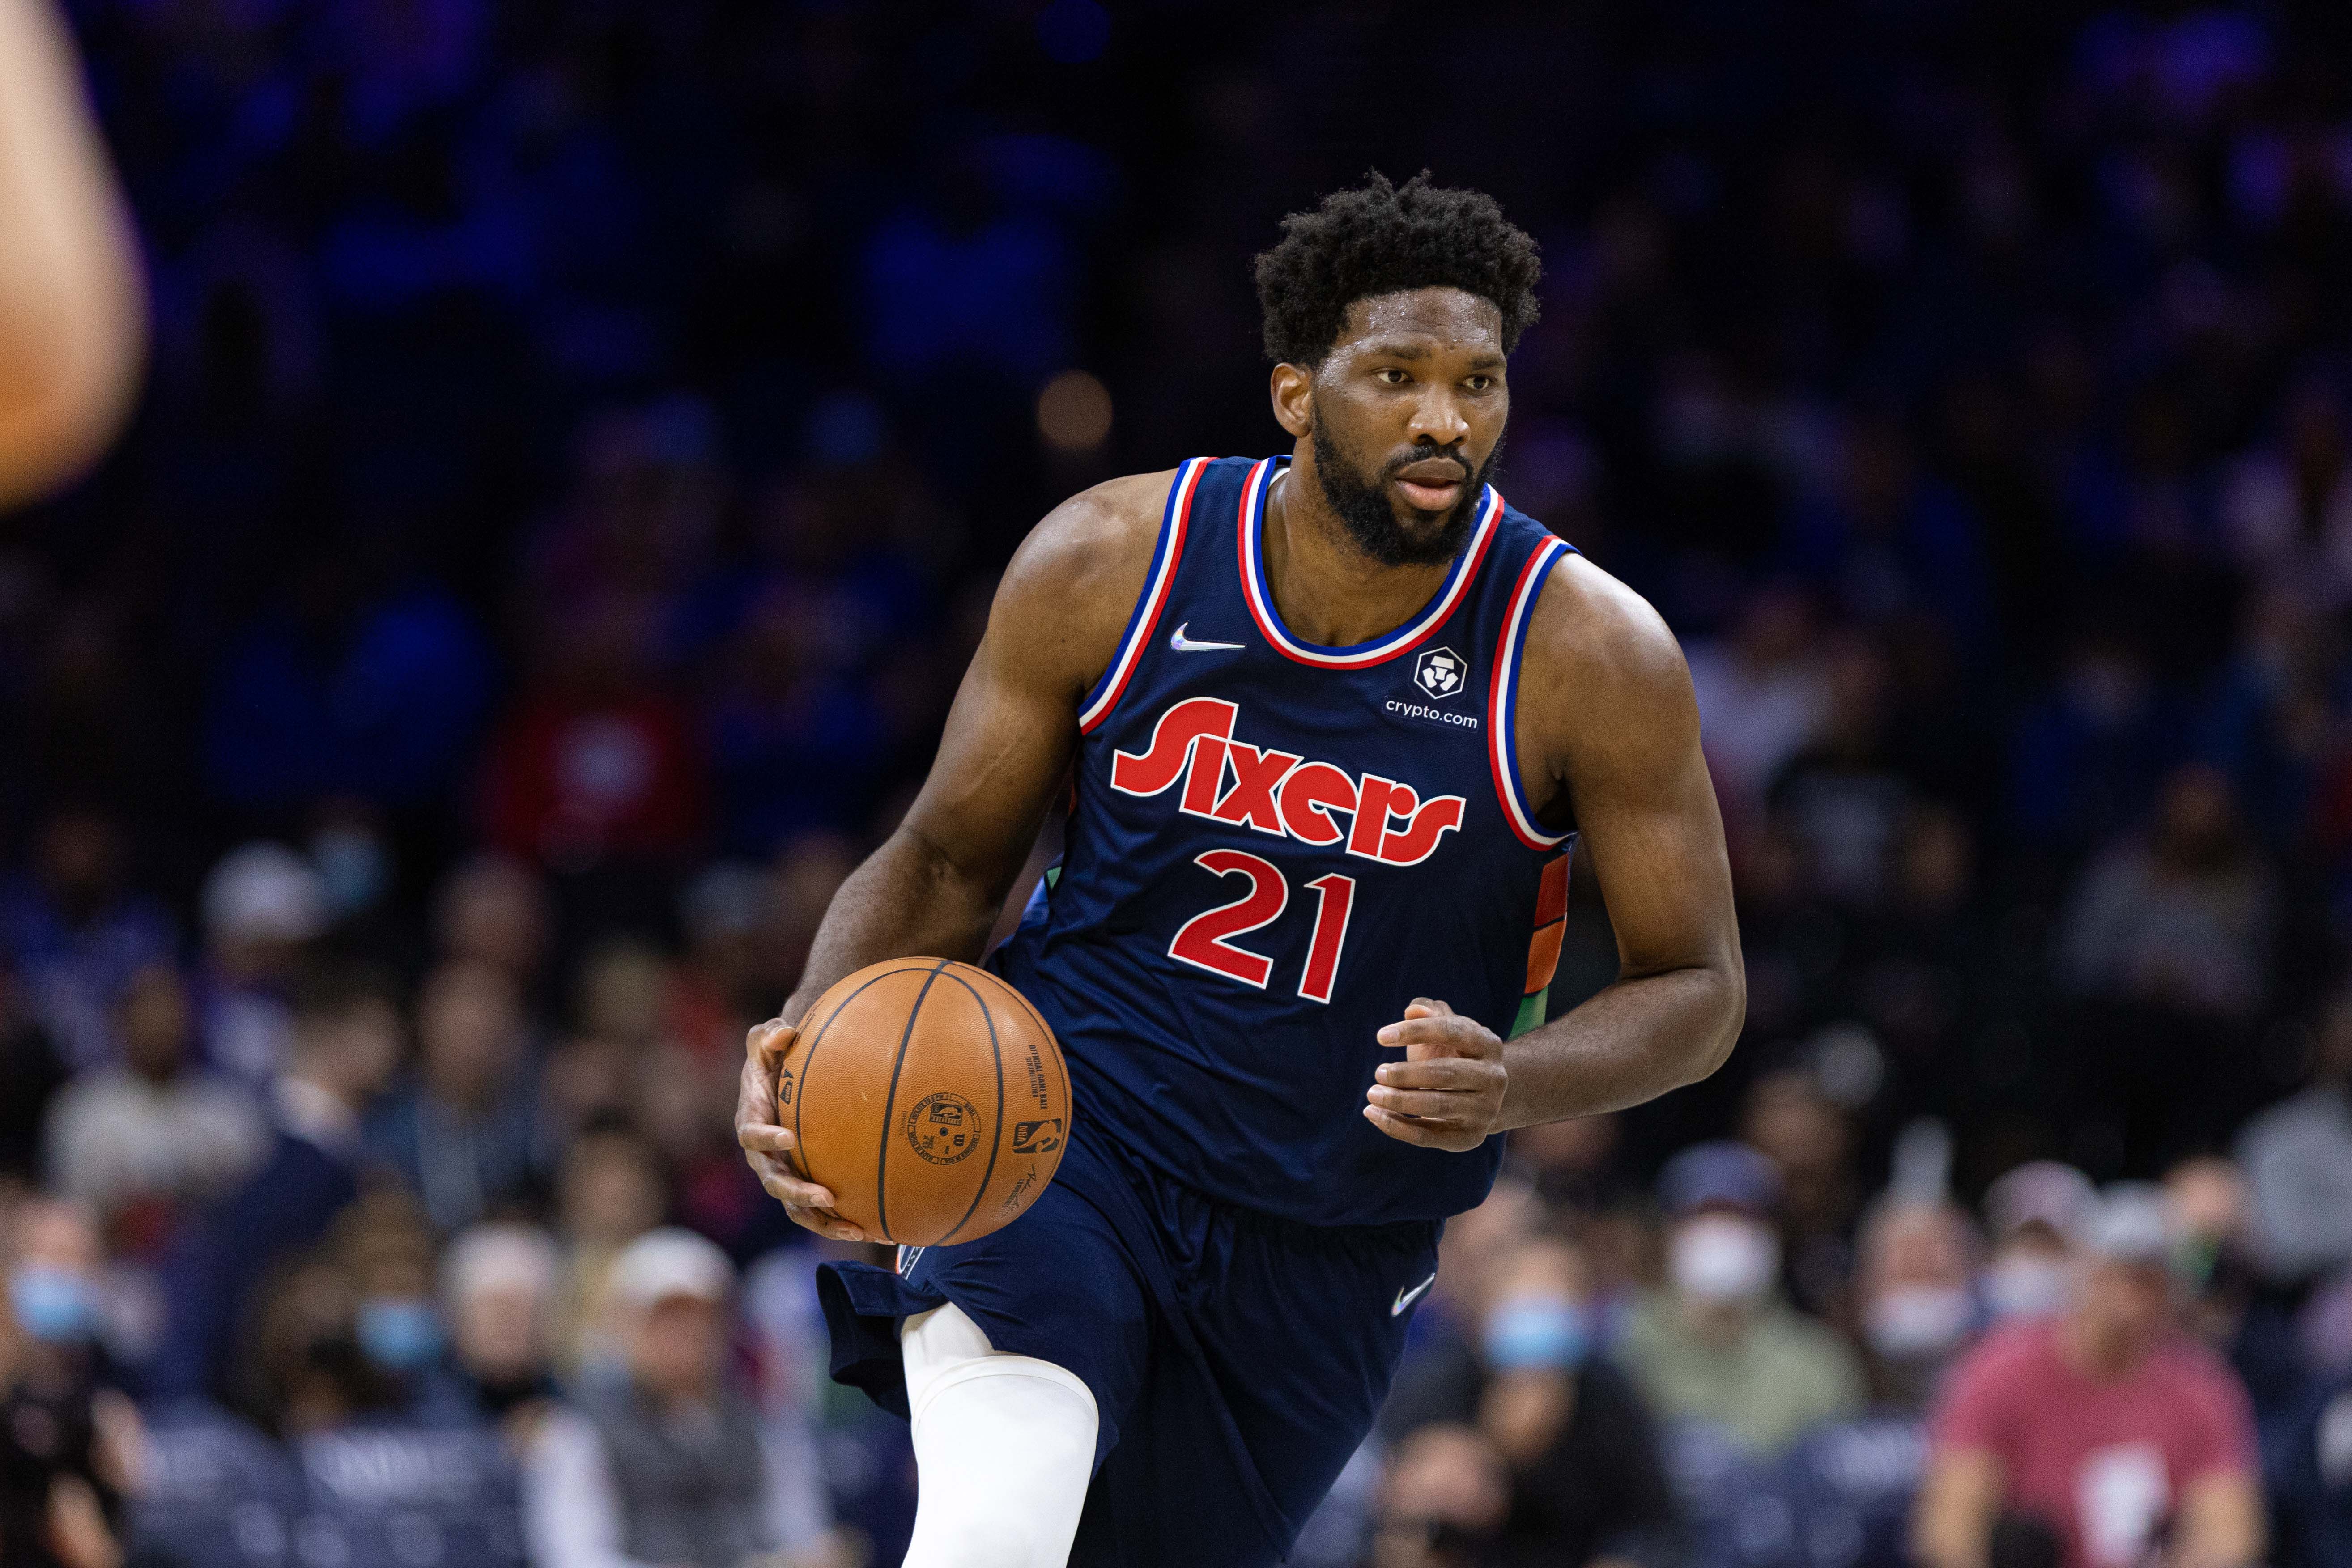 Sixers star C Joel Embiid back after nine-game COVID-19 absence | Reuters